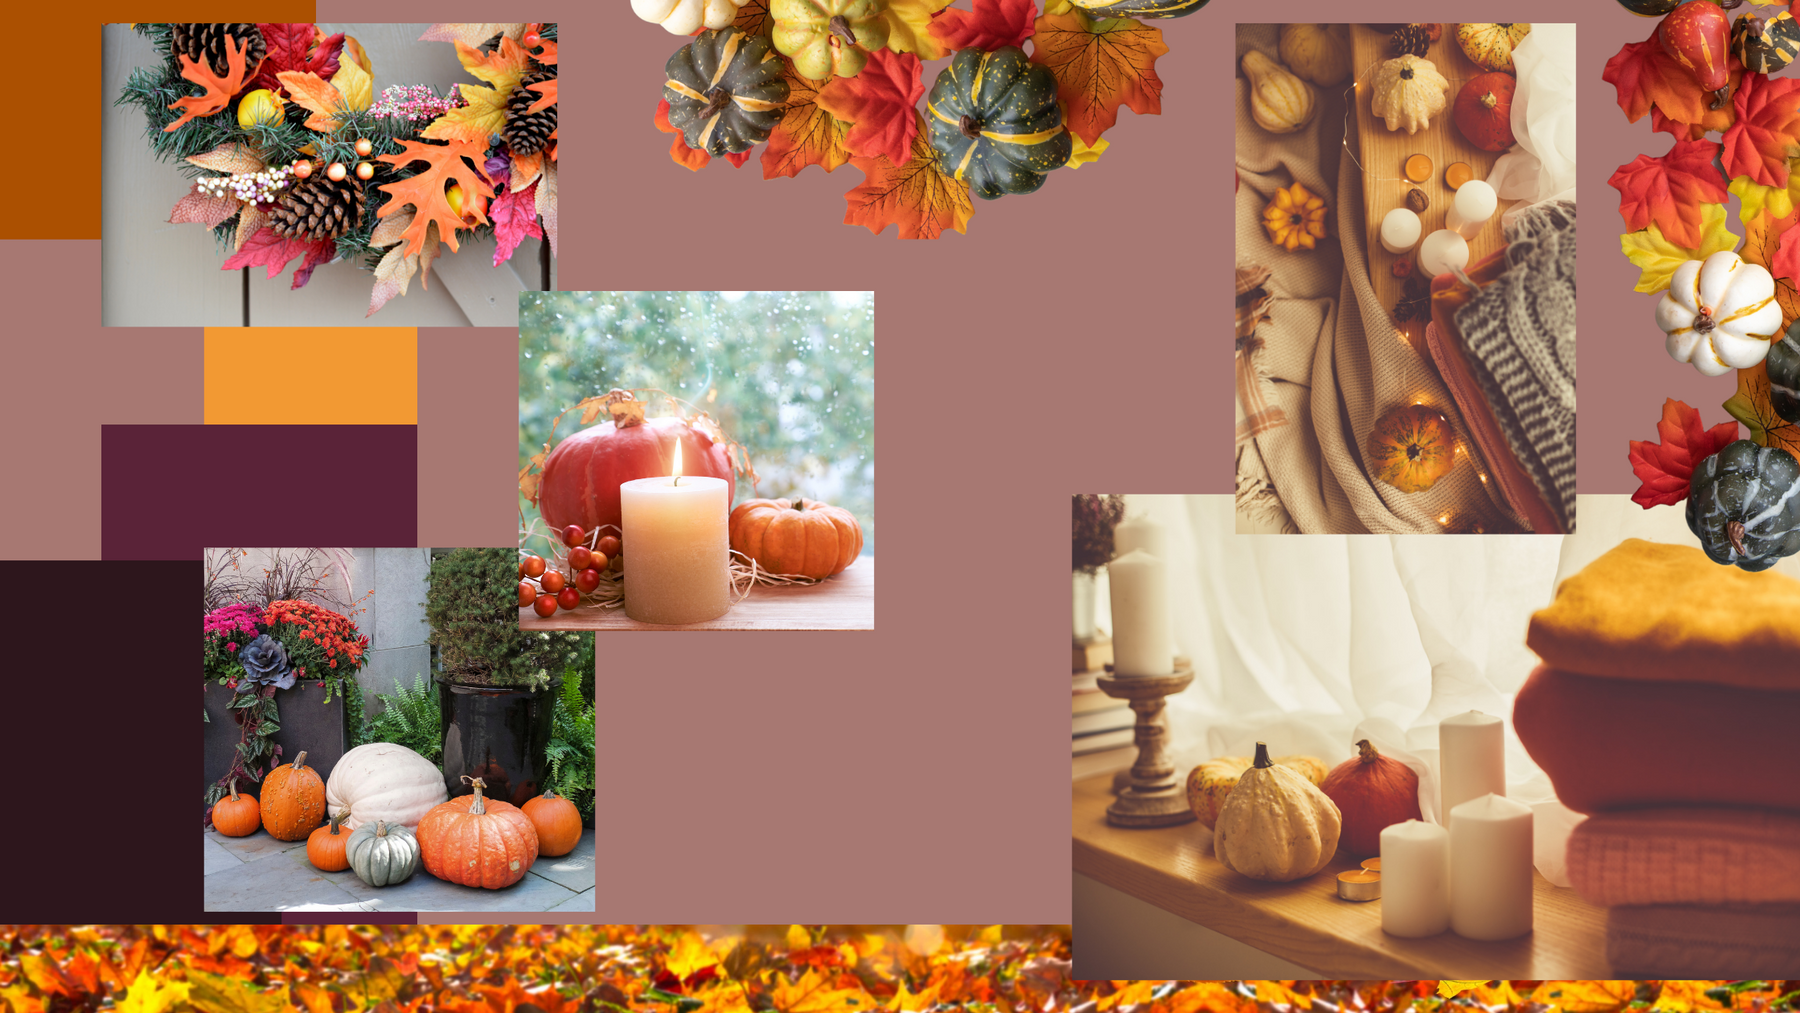 How to Add Autumn Decor to Your Home